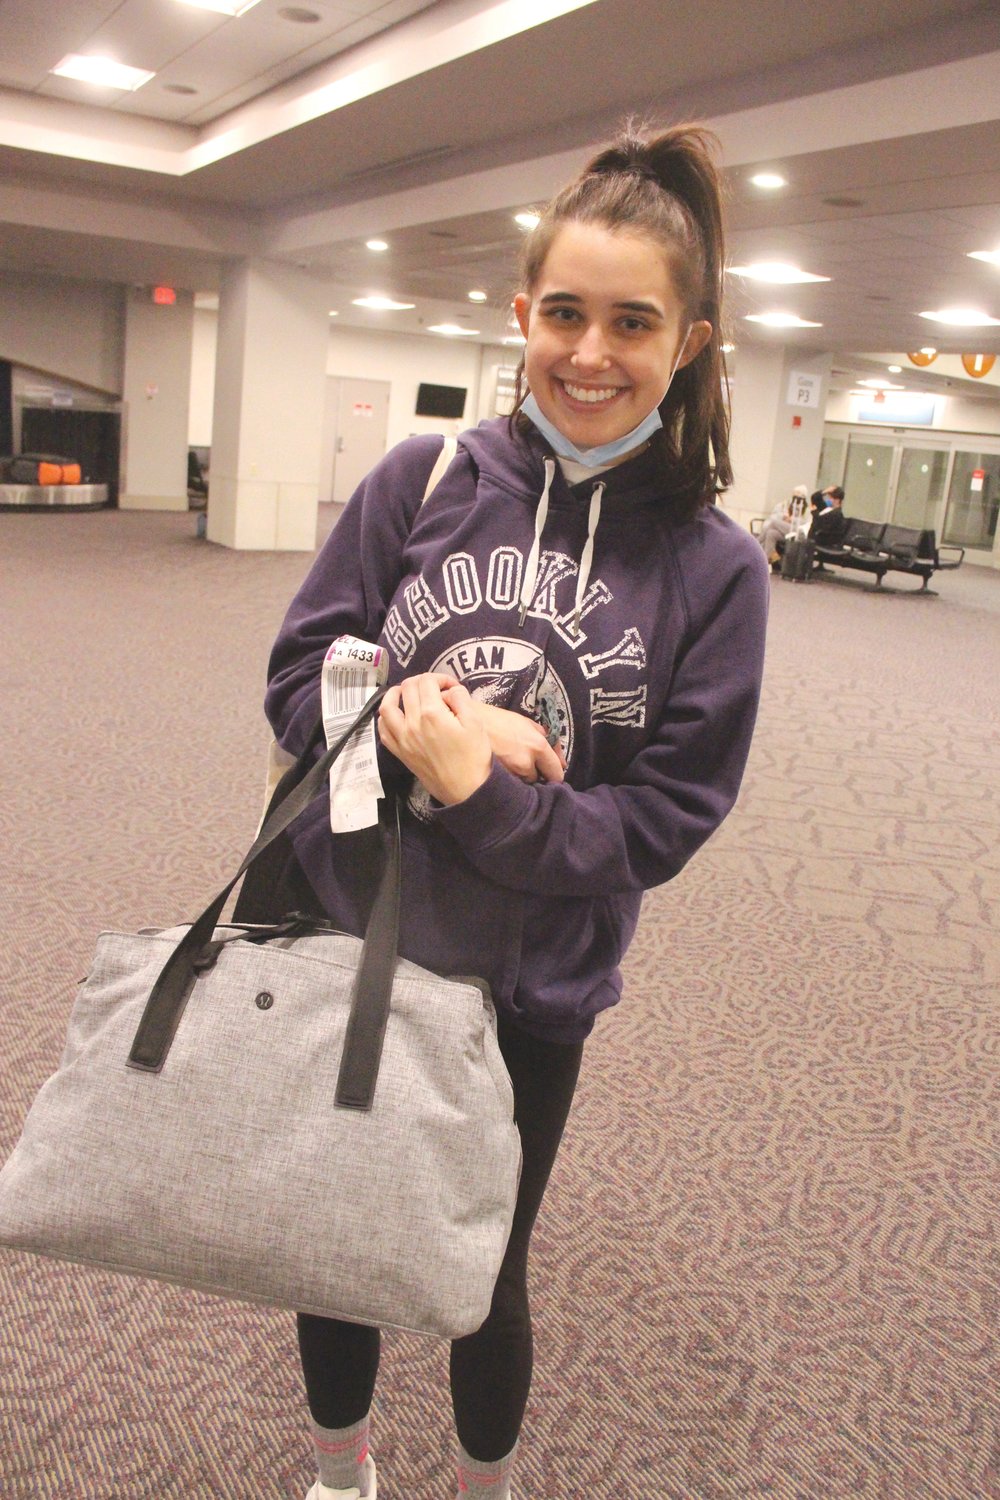 FAR LESS STRESSFUL: Grace Murphy, a Salve Regina student, returning from Oklahoma Sunday found the experience easy going compared to the anxiety she encountered when she made the trip last year.